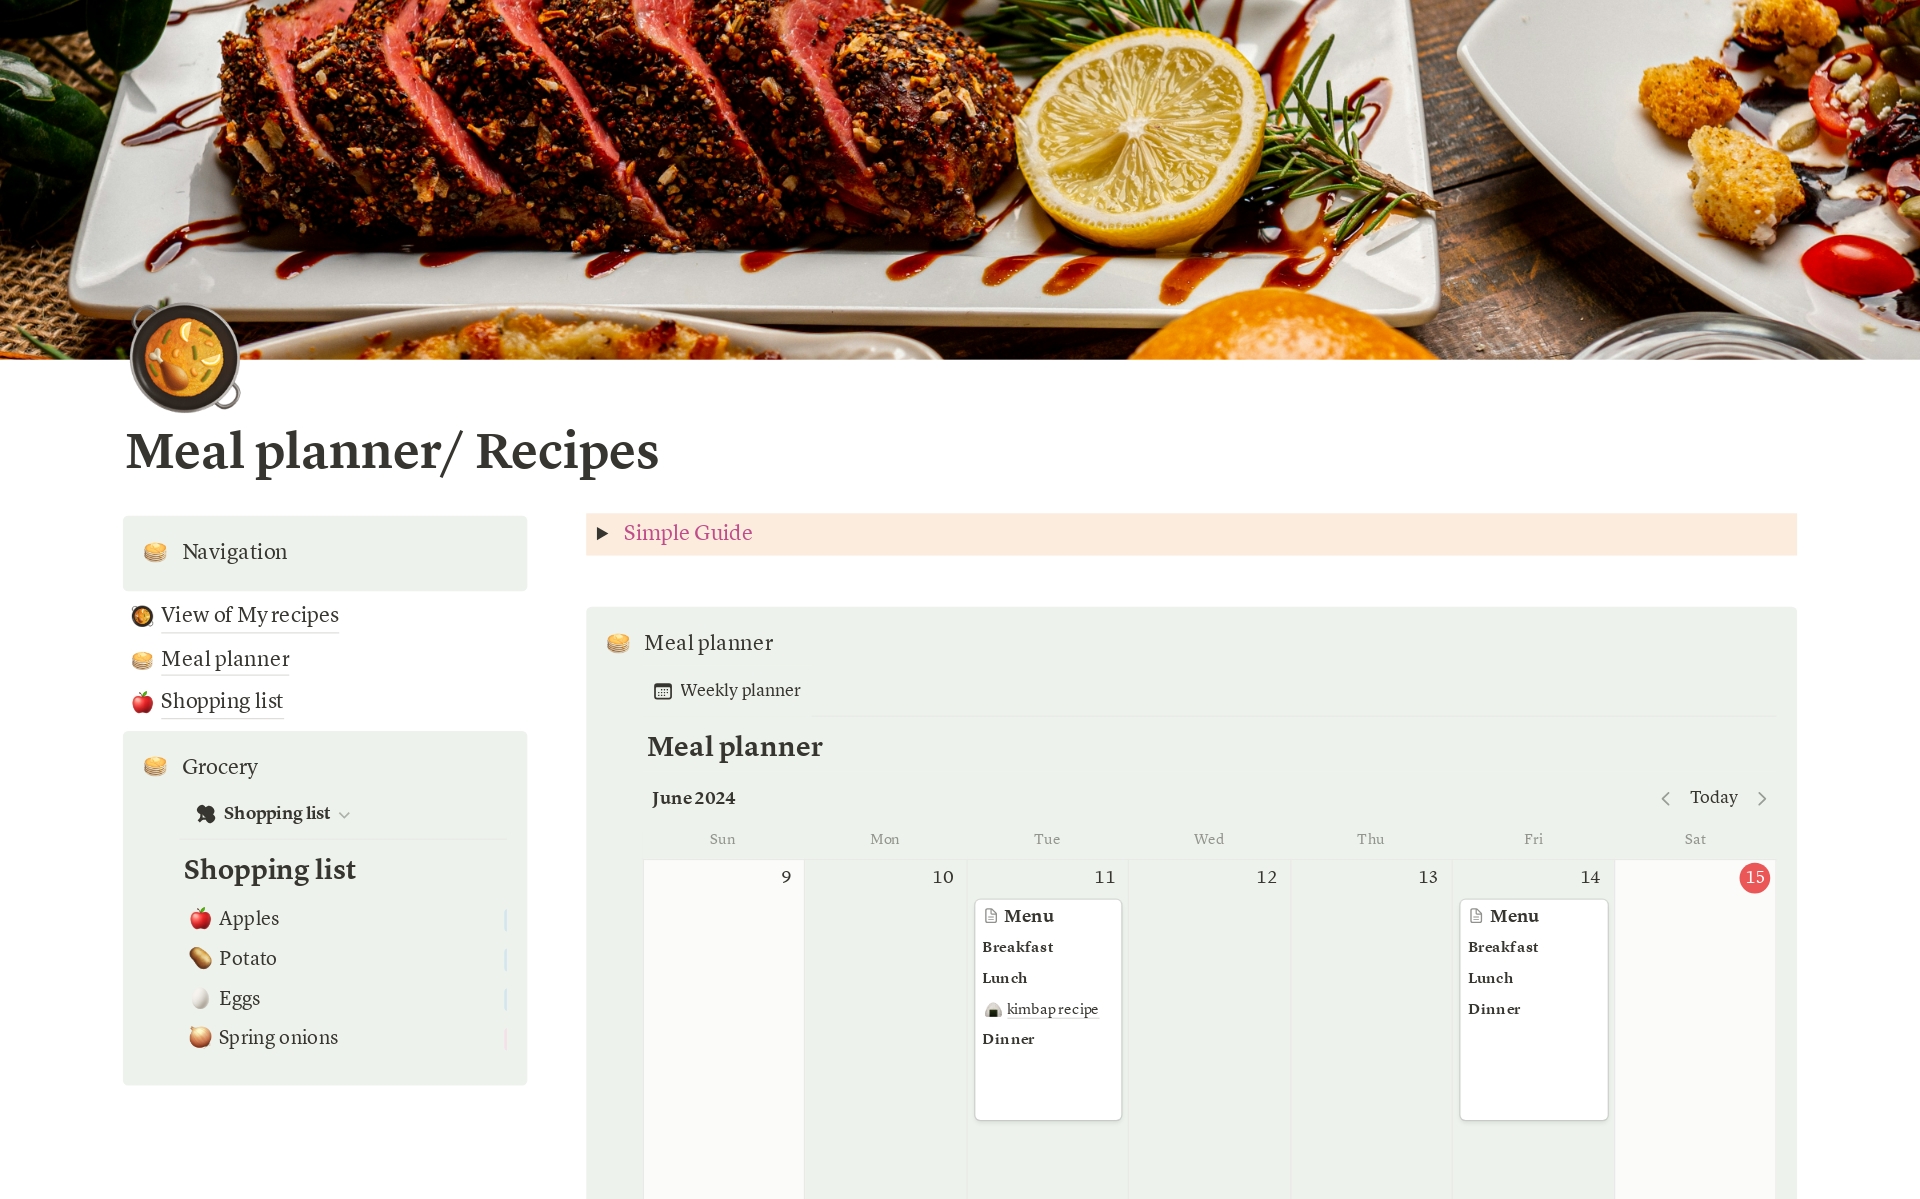 What will you get?
1 notion template

What’s included?

1-Meal planner

2-Recipes 

3-Shopping list